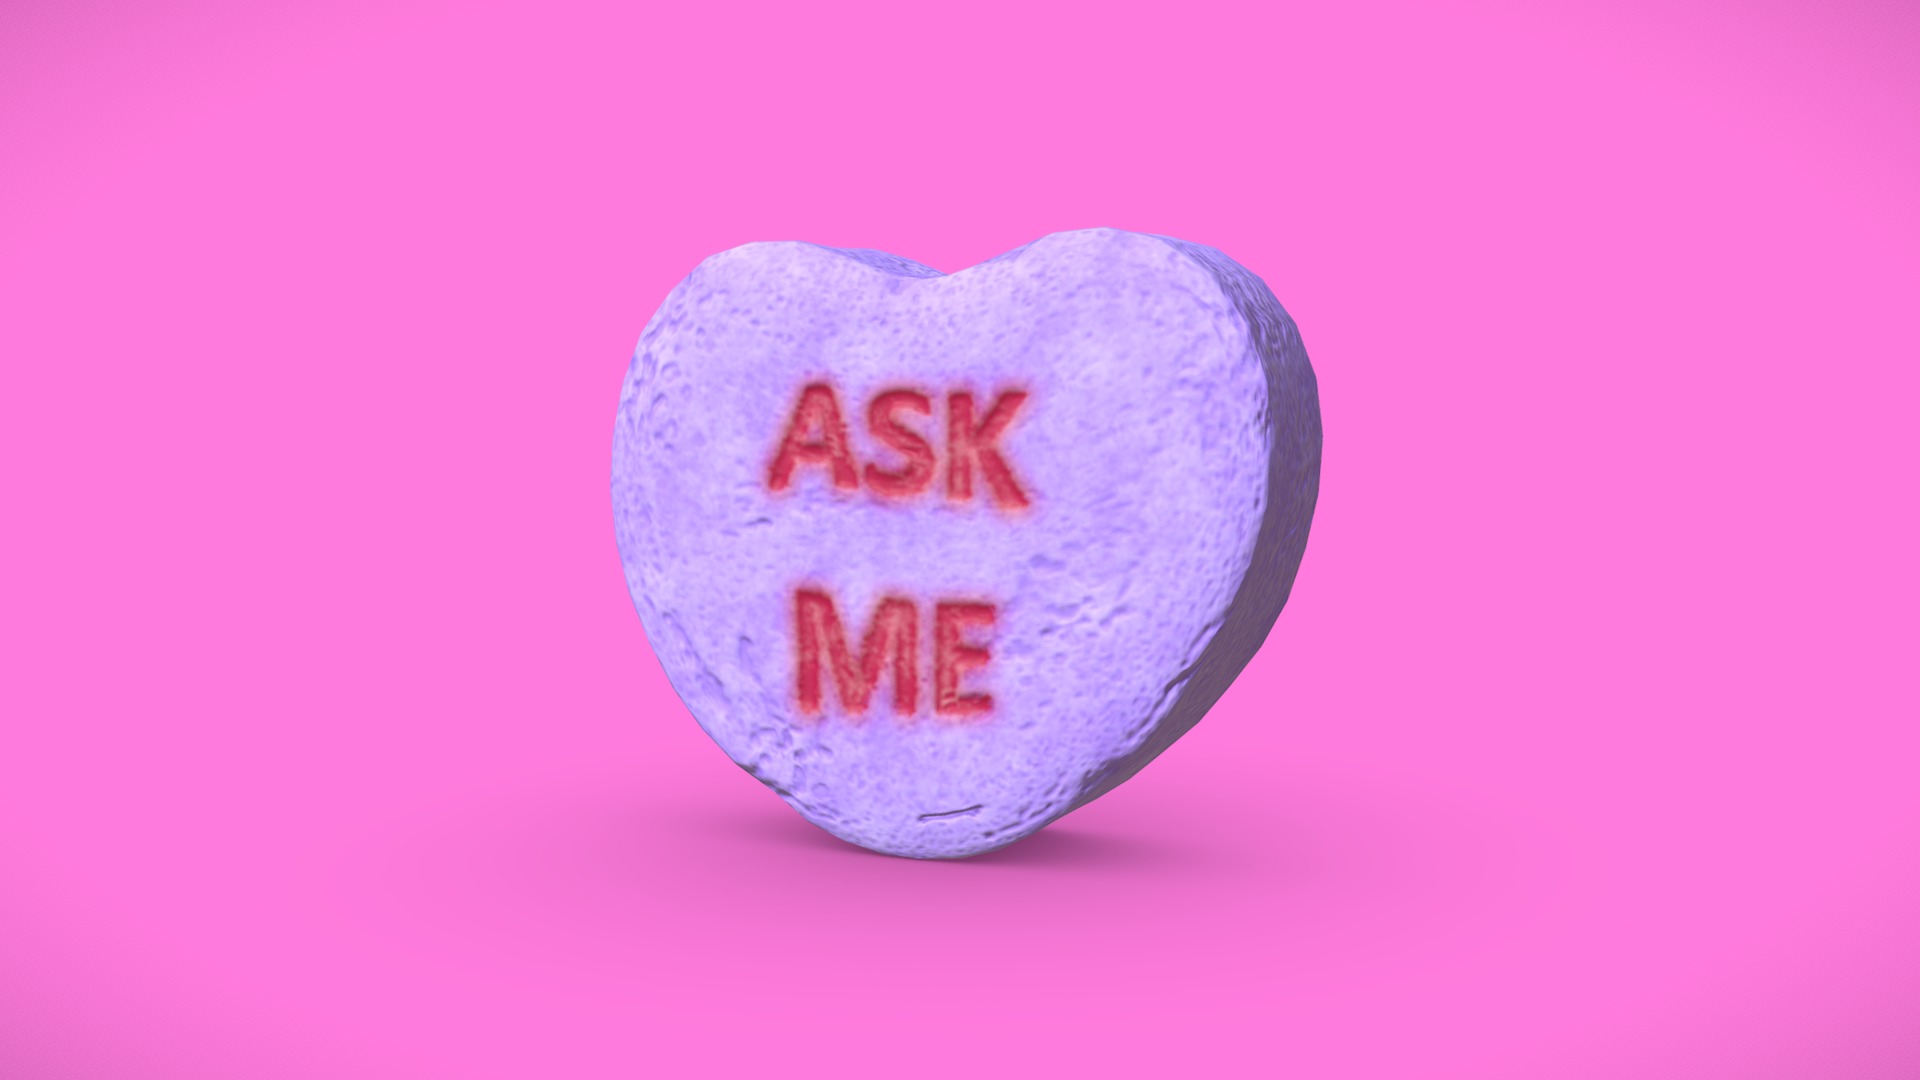 3D model Heart Candy – Ask Me - This is a 3D model of the Heart Candy - Ask Me. The 3D model is about a purple and white ball.